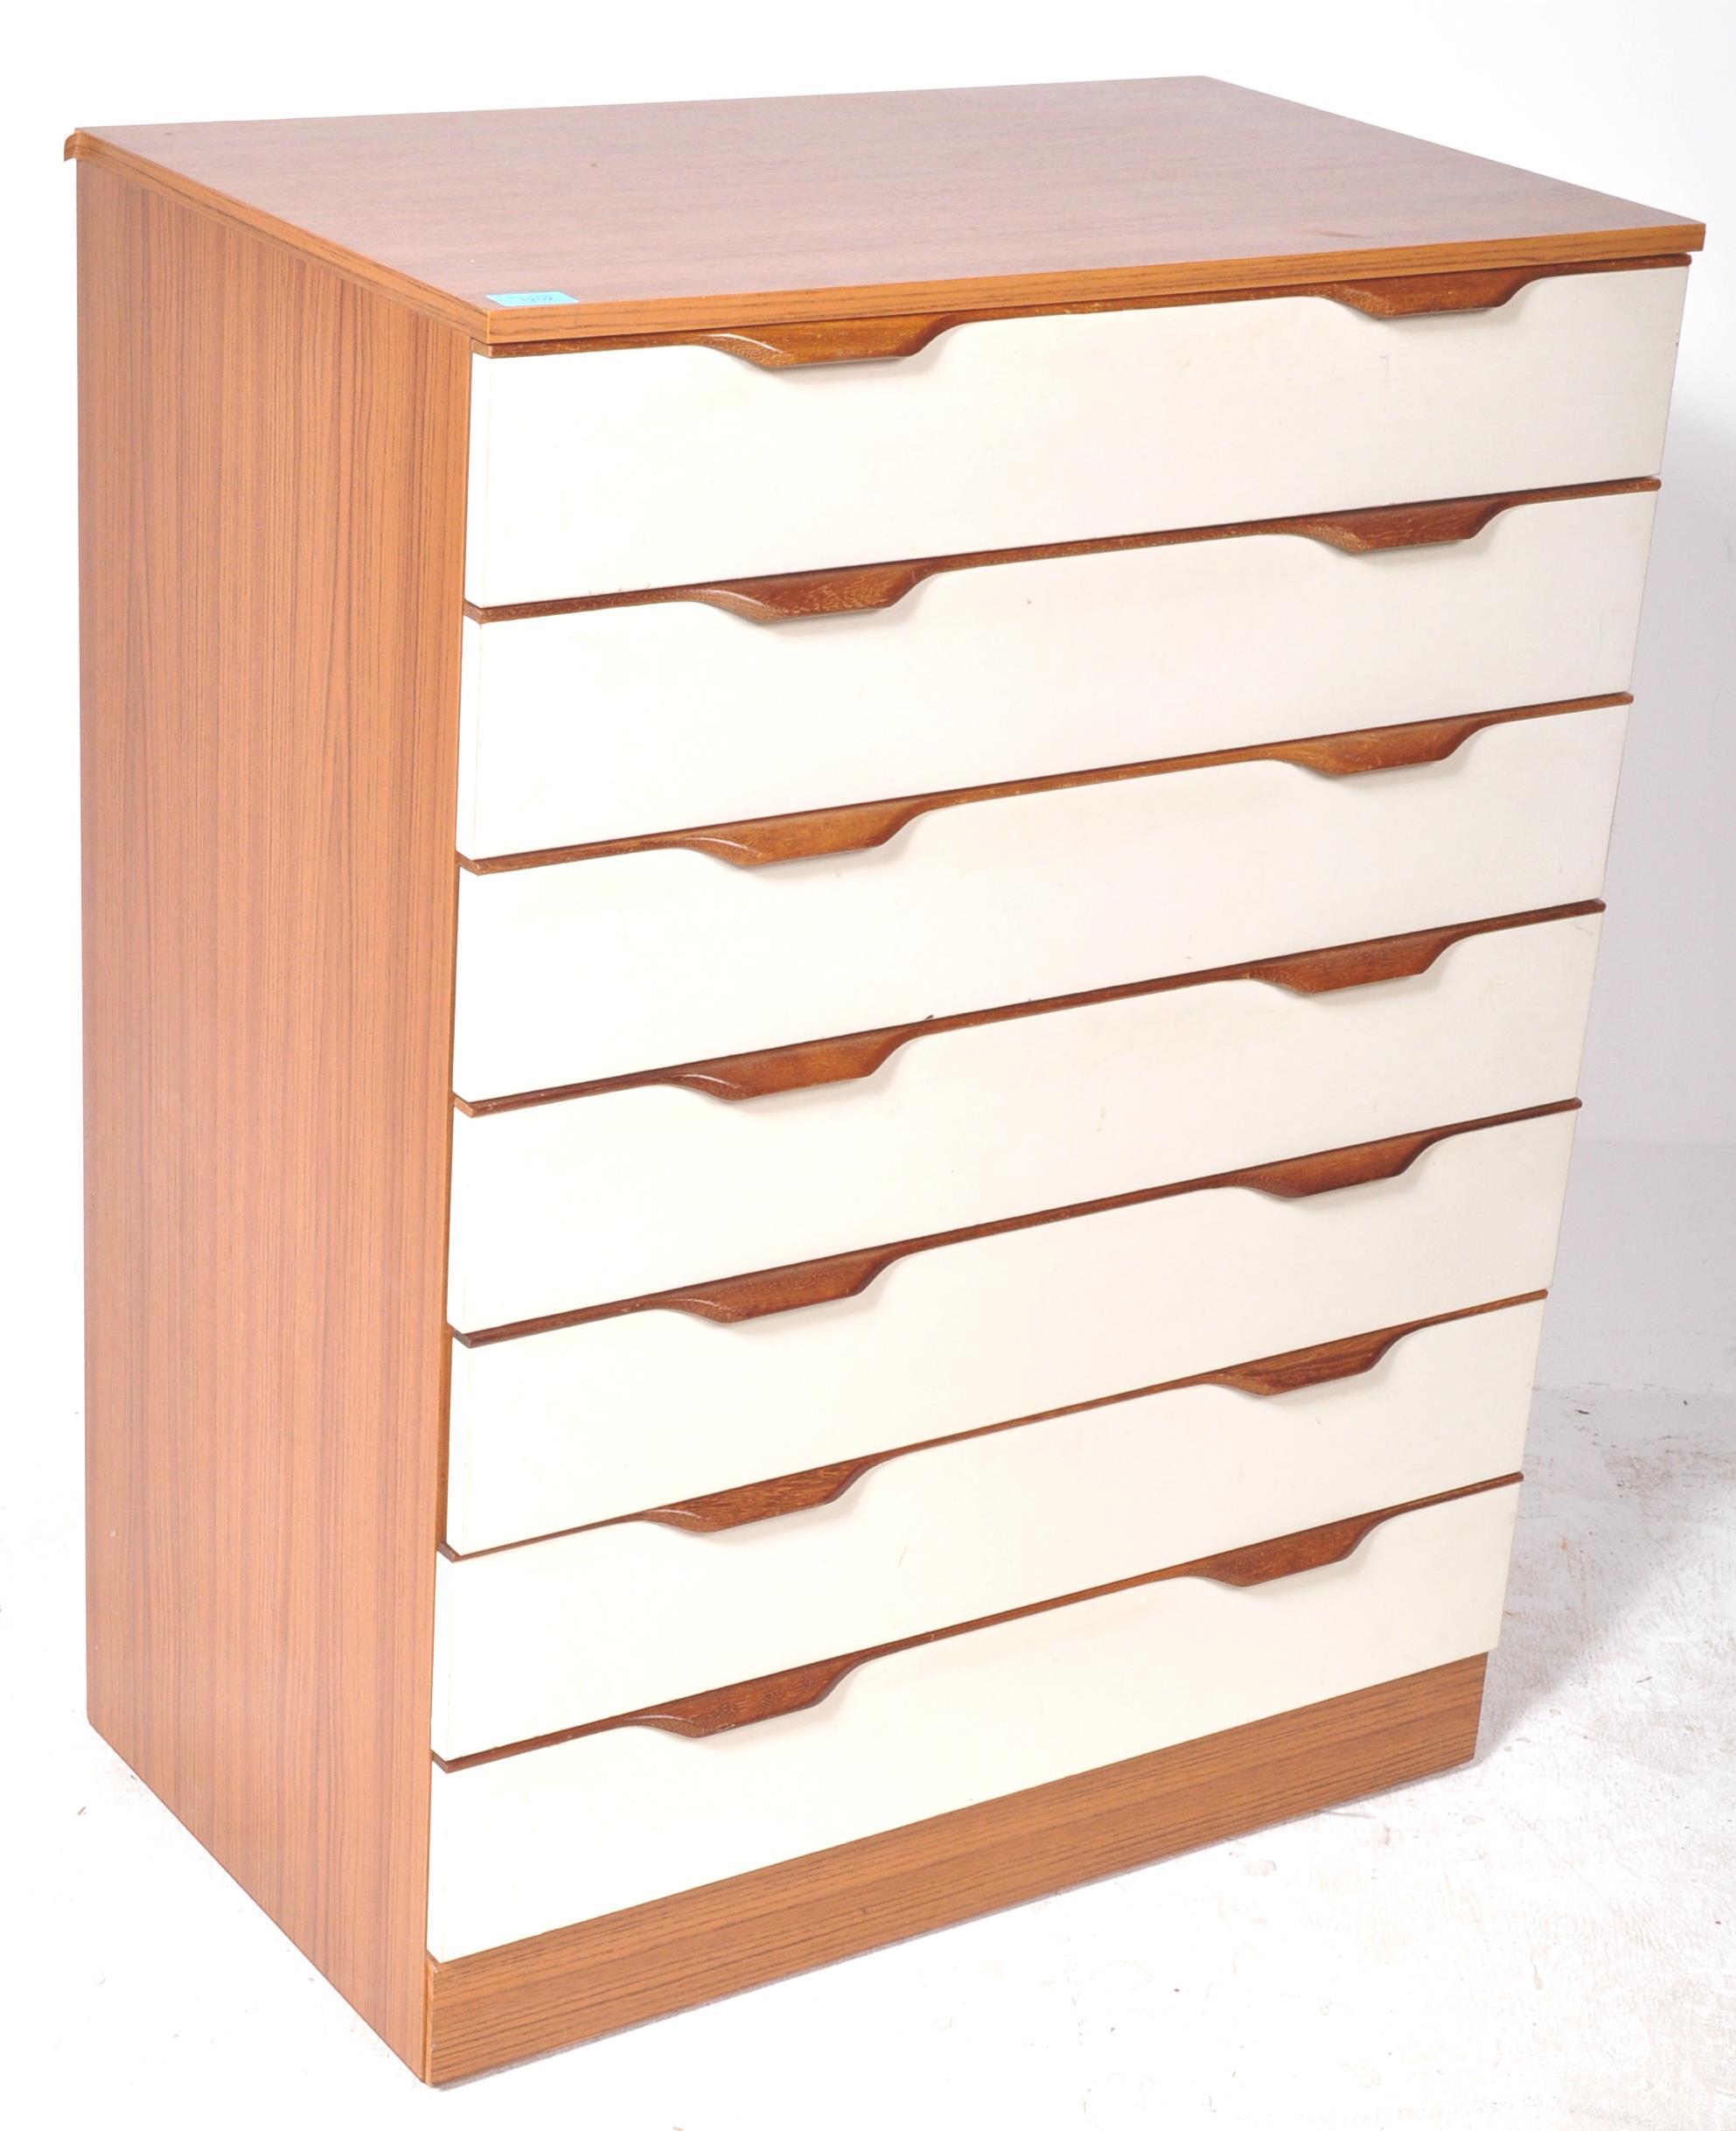 VINTAGE MID CENTURY 1960S EUROPA TEAK CHEST OF DRAWERS - Image 2 of 6